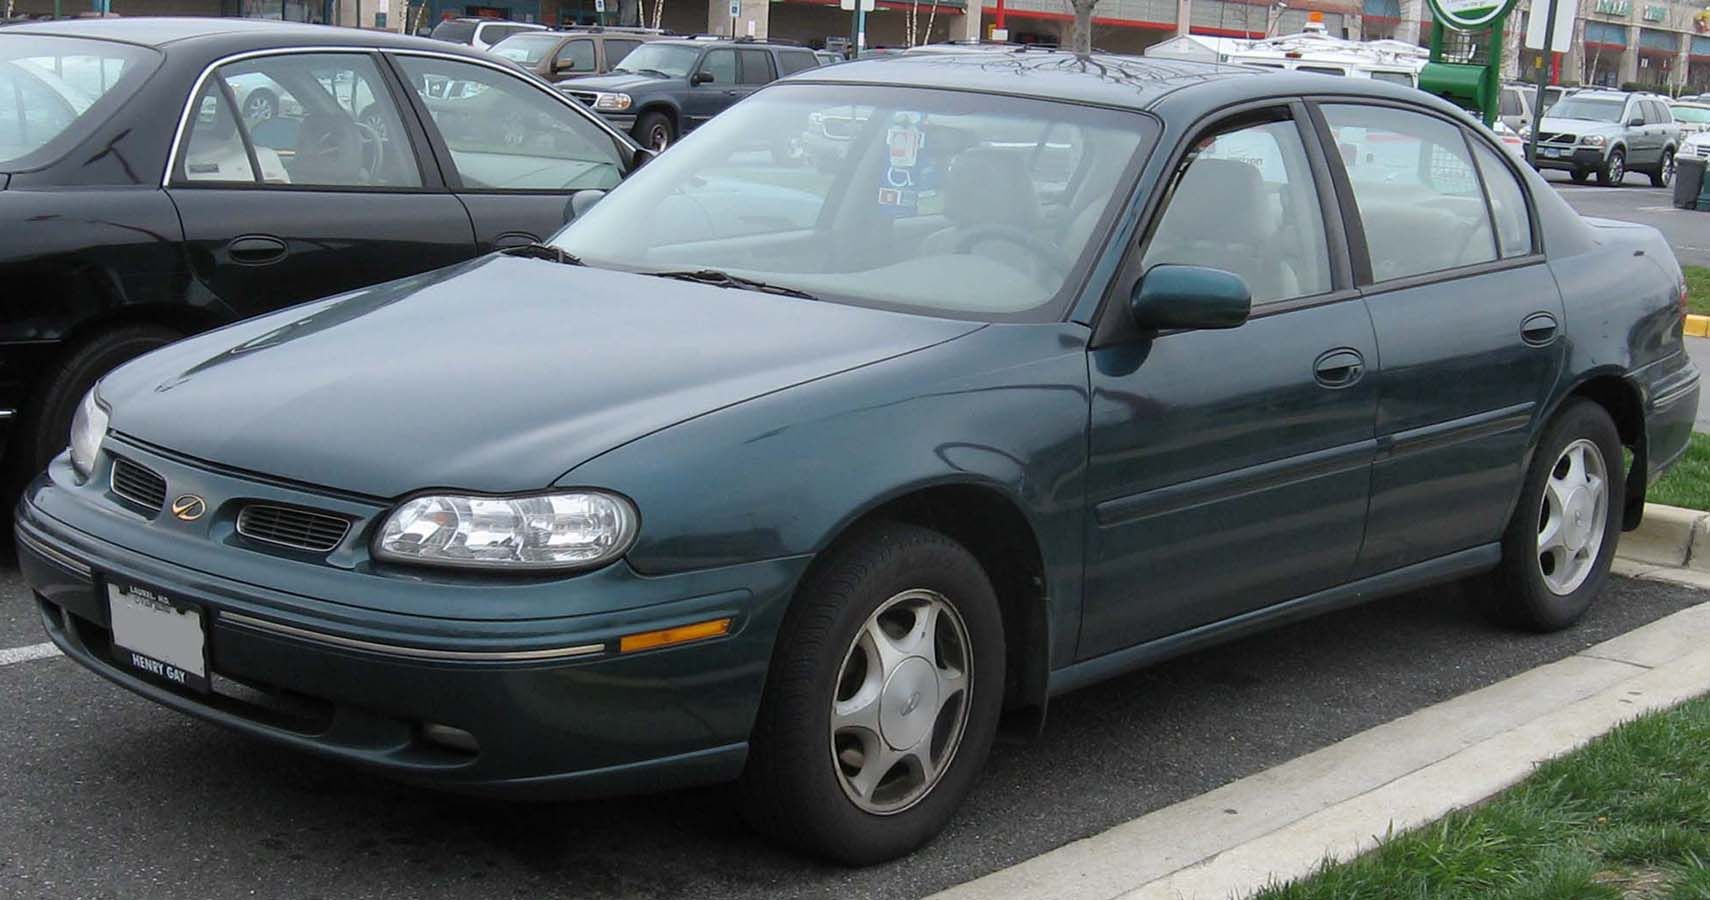 1997-1999 Oldsmobile Cutlass: A Mid-Sized End To A Big Legacy